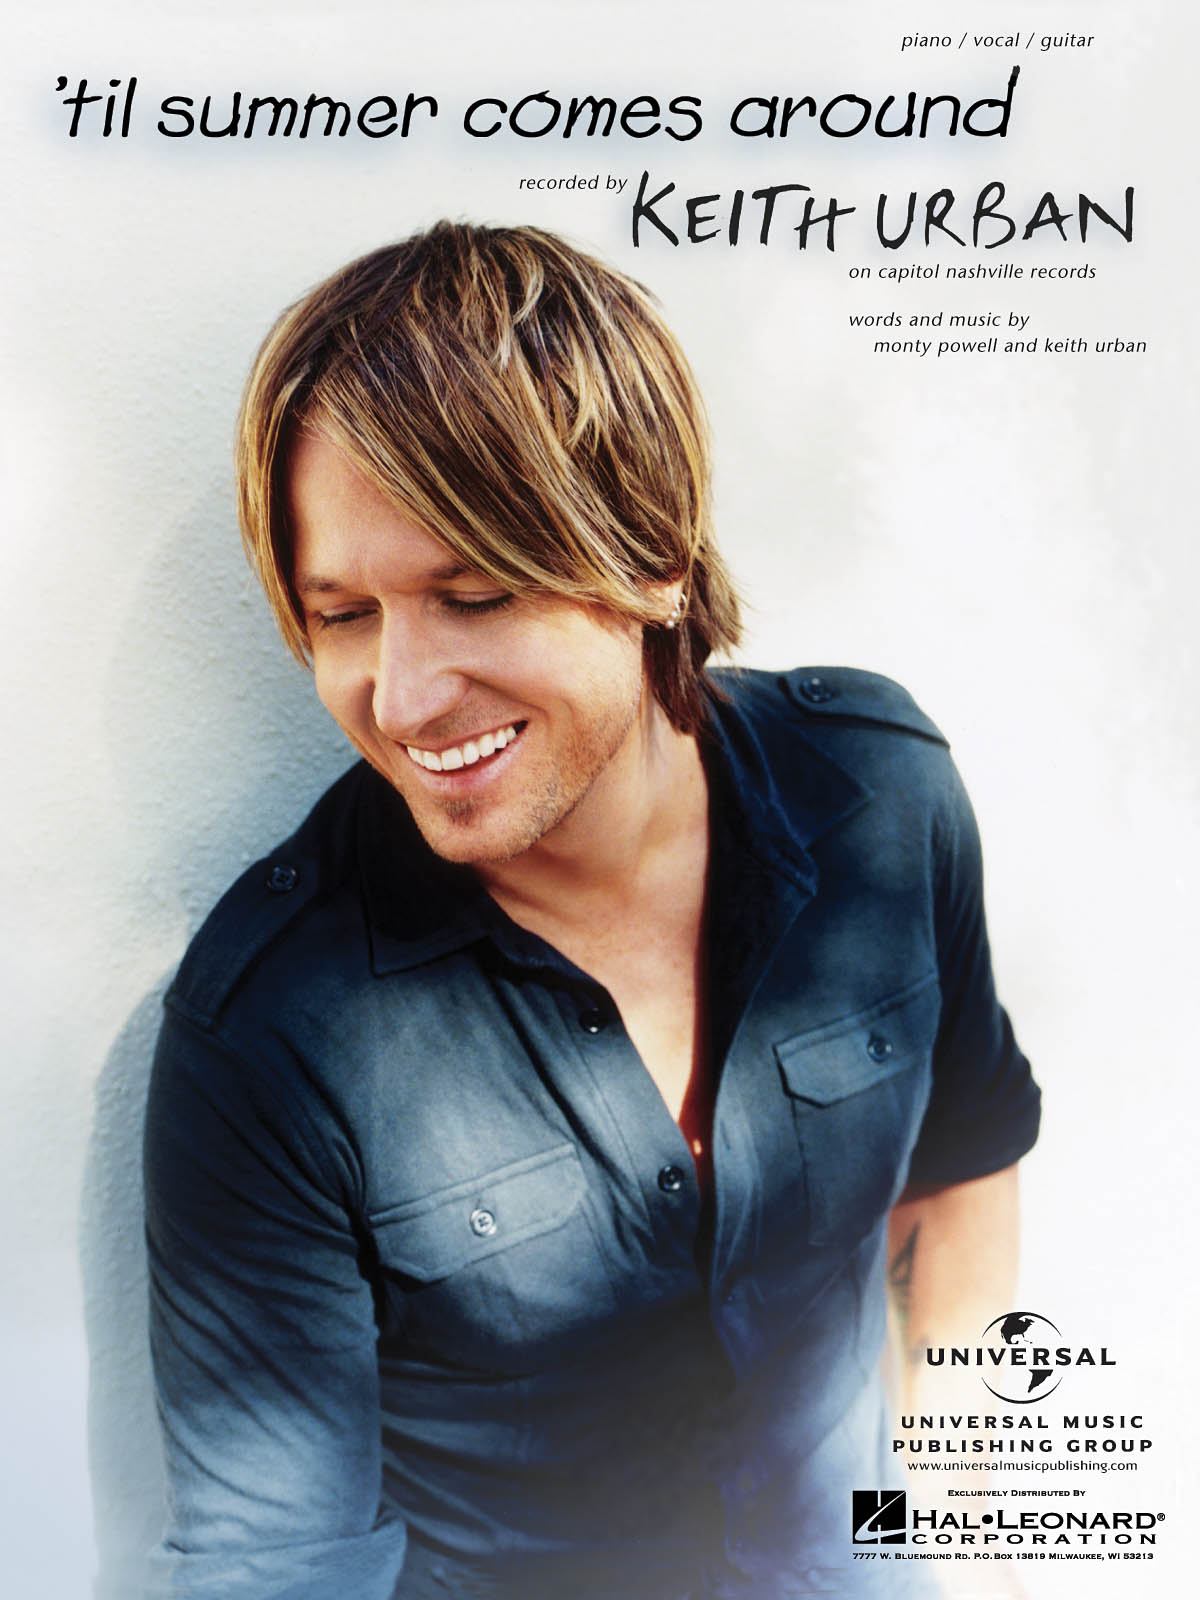 Keith Urban: 'Til Summer Comes Around: Vocal and Piano: Single Sheet